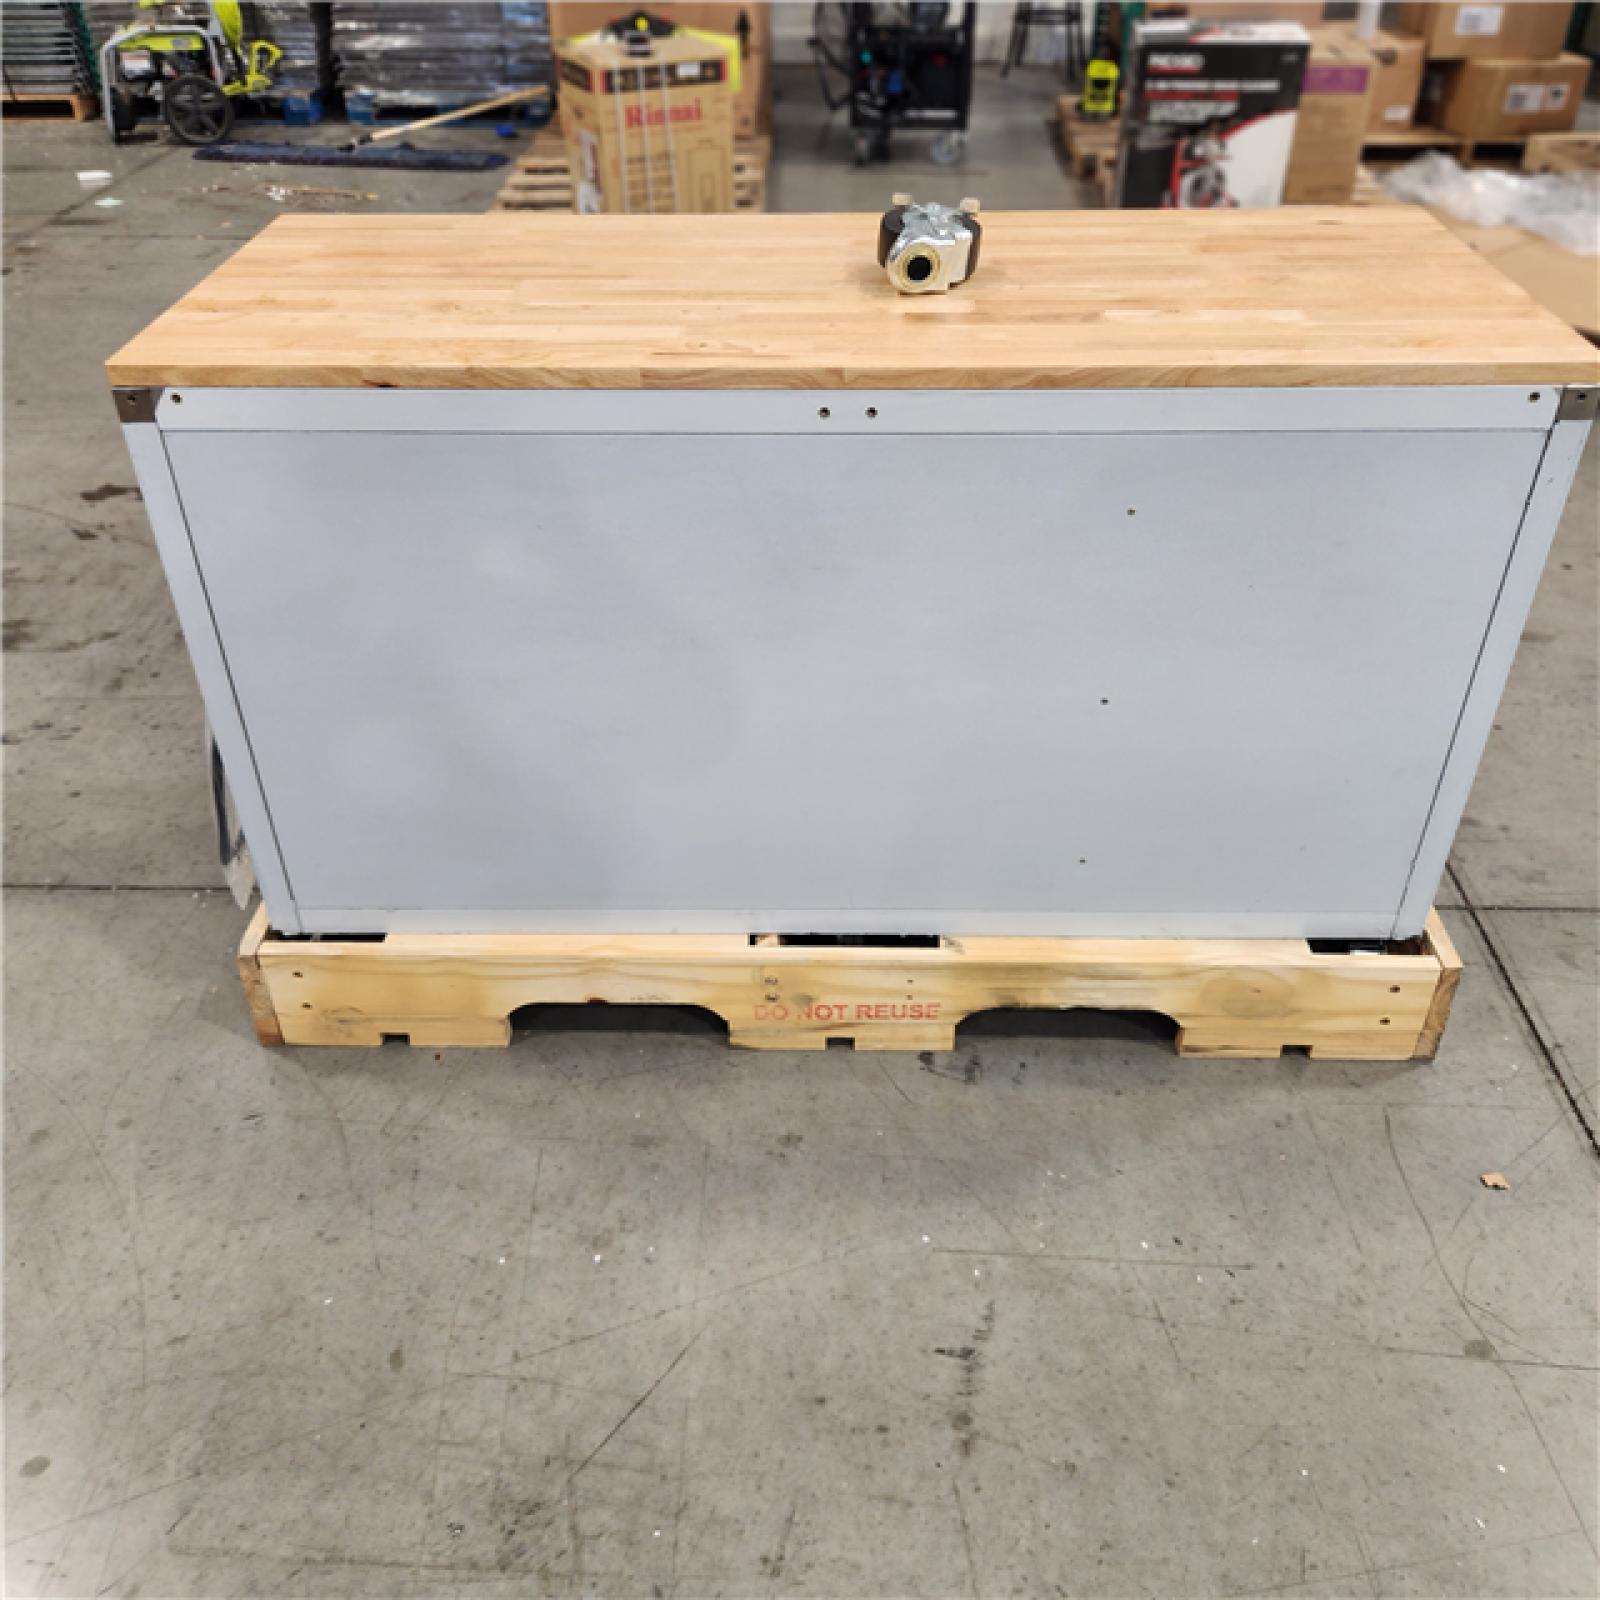 DALLAS LOCATION - Husky  72 in. x 24 in. D Standard Duty 18-Drawer Mobile Workbench Tool Chest with Solid Wood Top in Stainless Steel